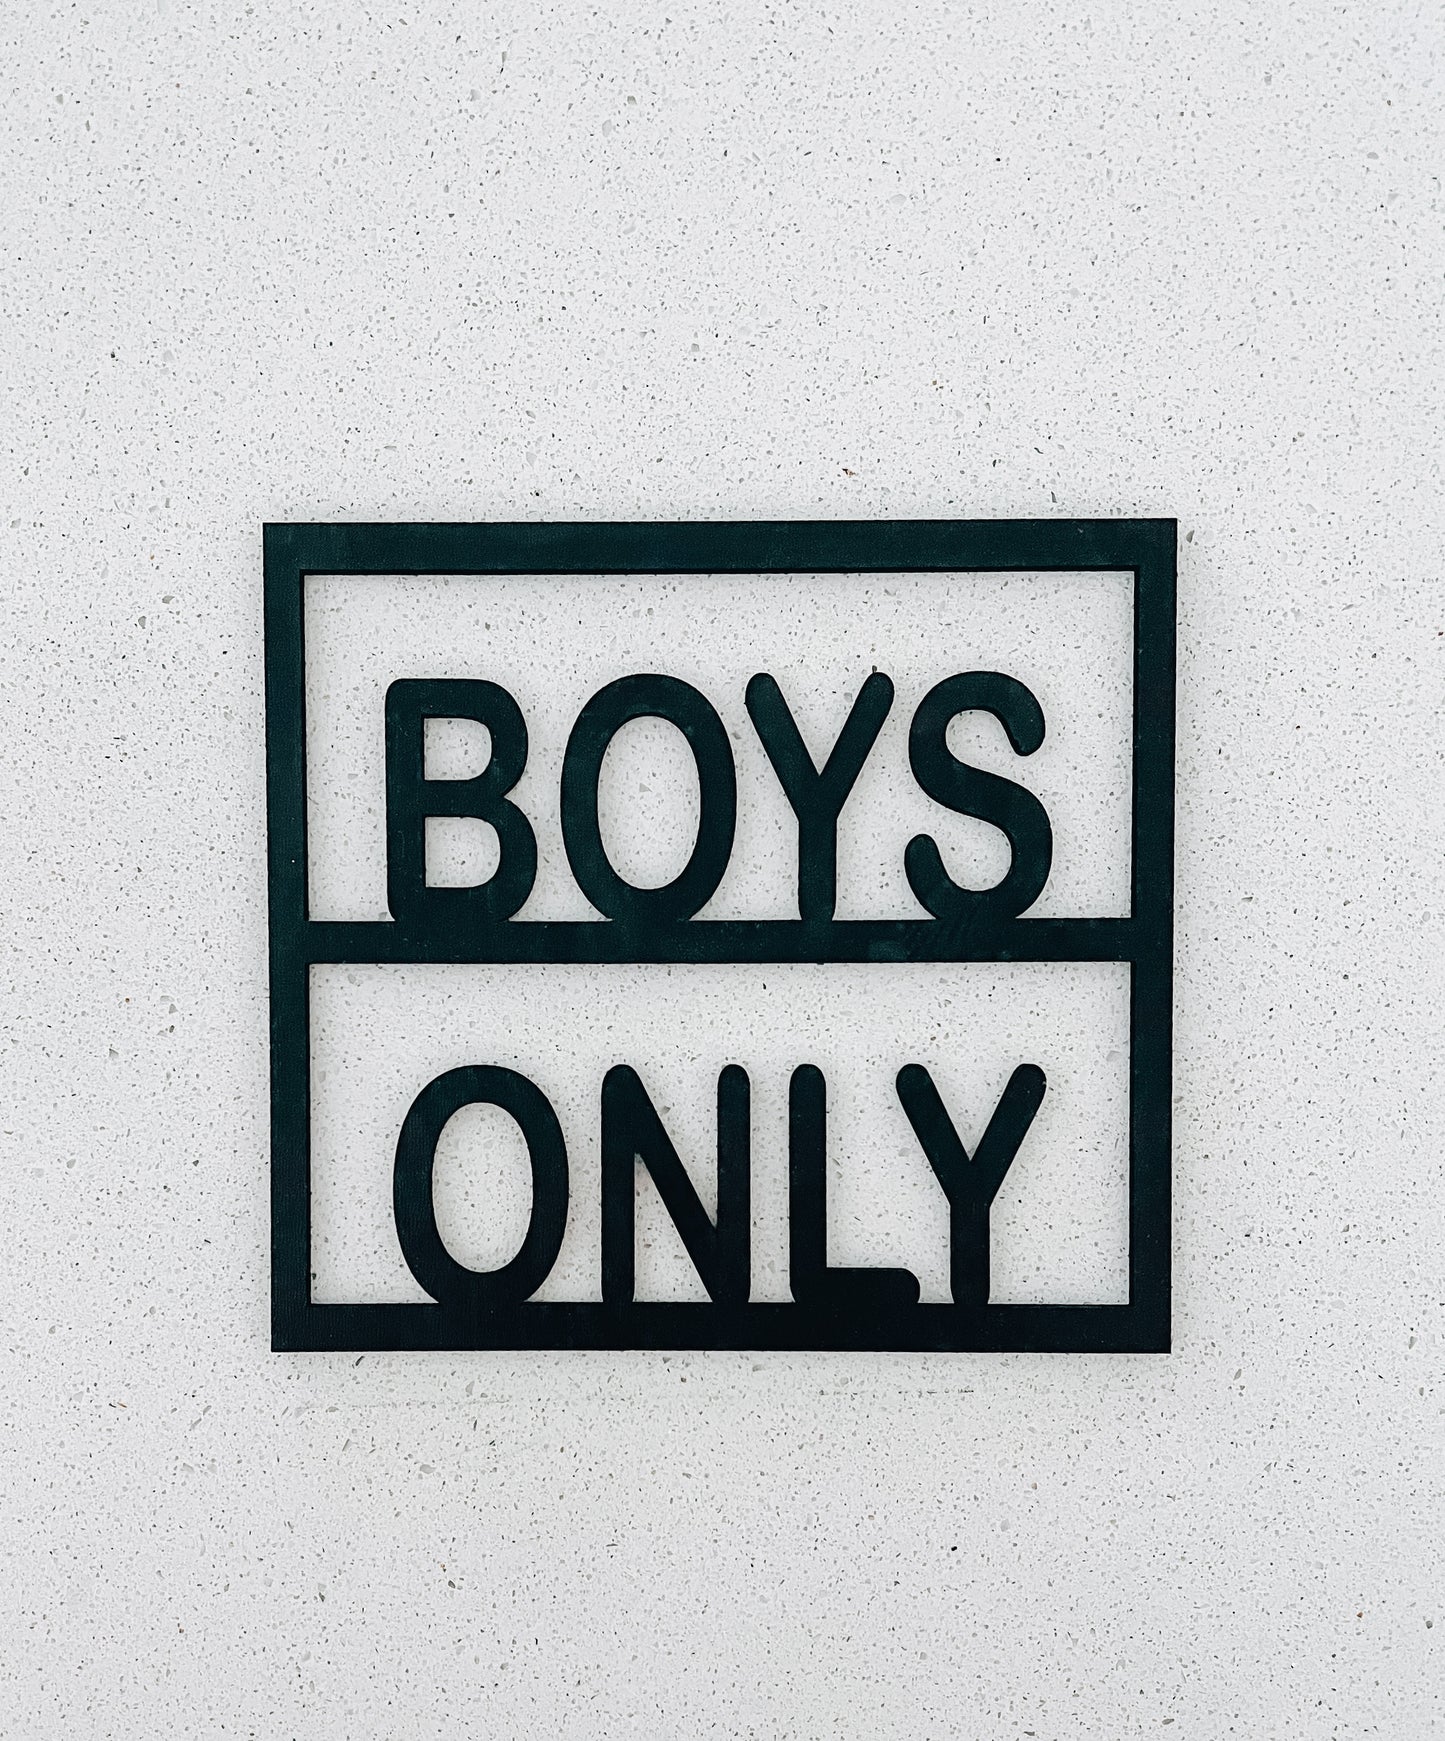 Boys Only - Girls Only